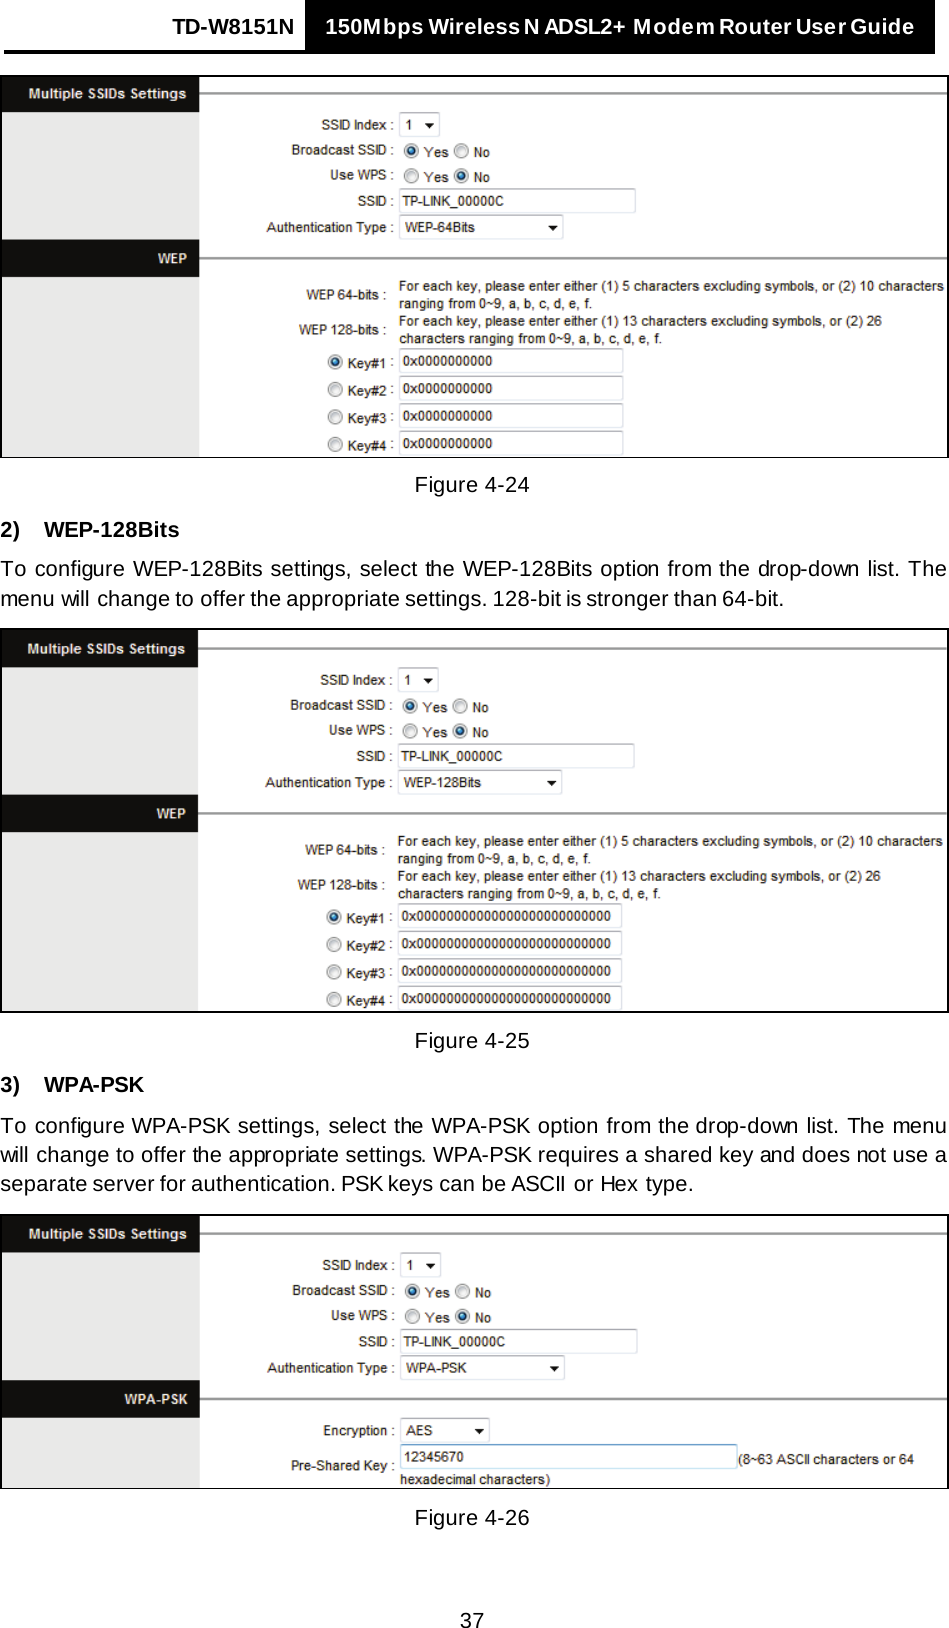 TD-W8151N 150Mbps Wireless N ADSL2+ Modem Router User Guide   37  Figure 4-24 2) WEP-128Bits To configure WEP-128Bits settings, select the WEP-128Bits option from the drop-down list. The menu will change to offer the appropriate settings. 128-bit is stronger than 64-bit.  Figure 4-25 3) WPA-PSK To configure WPA-PSK settings, select the WPA-PSK option from the drop-down list. The menu will change to offer the appropriate settings. WPA-PSK requires a shared key and does not use a separate server for authentication. PSK keys can be ASCII or Hex type.  Figure 4-26 